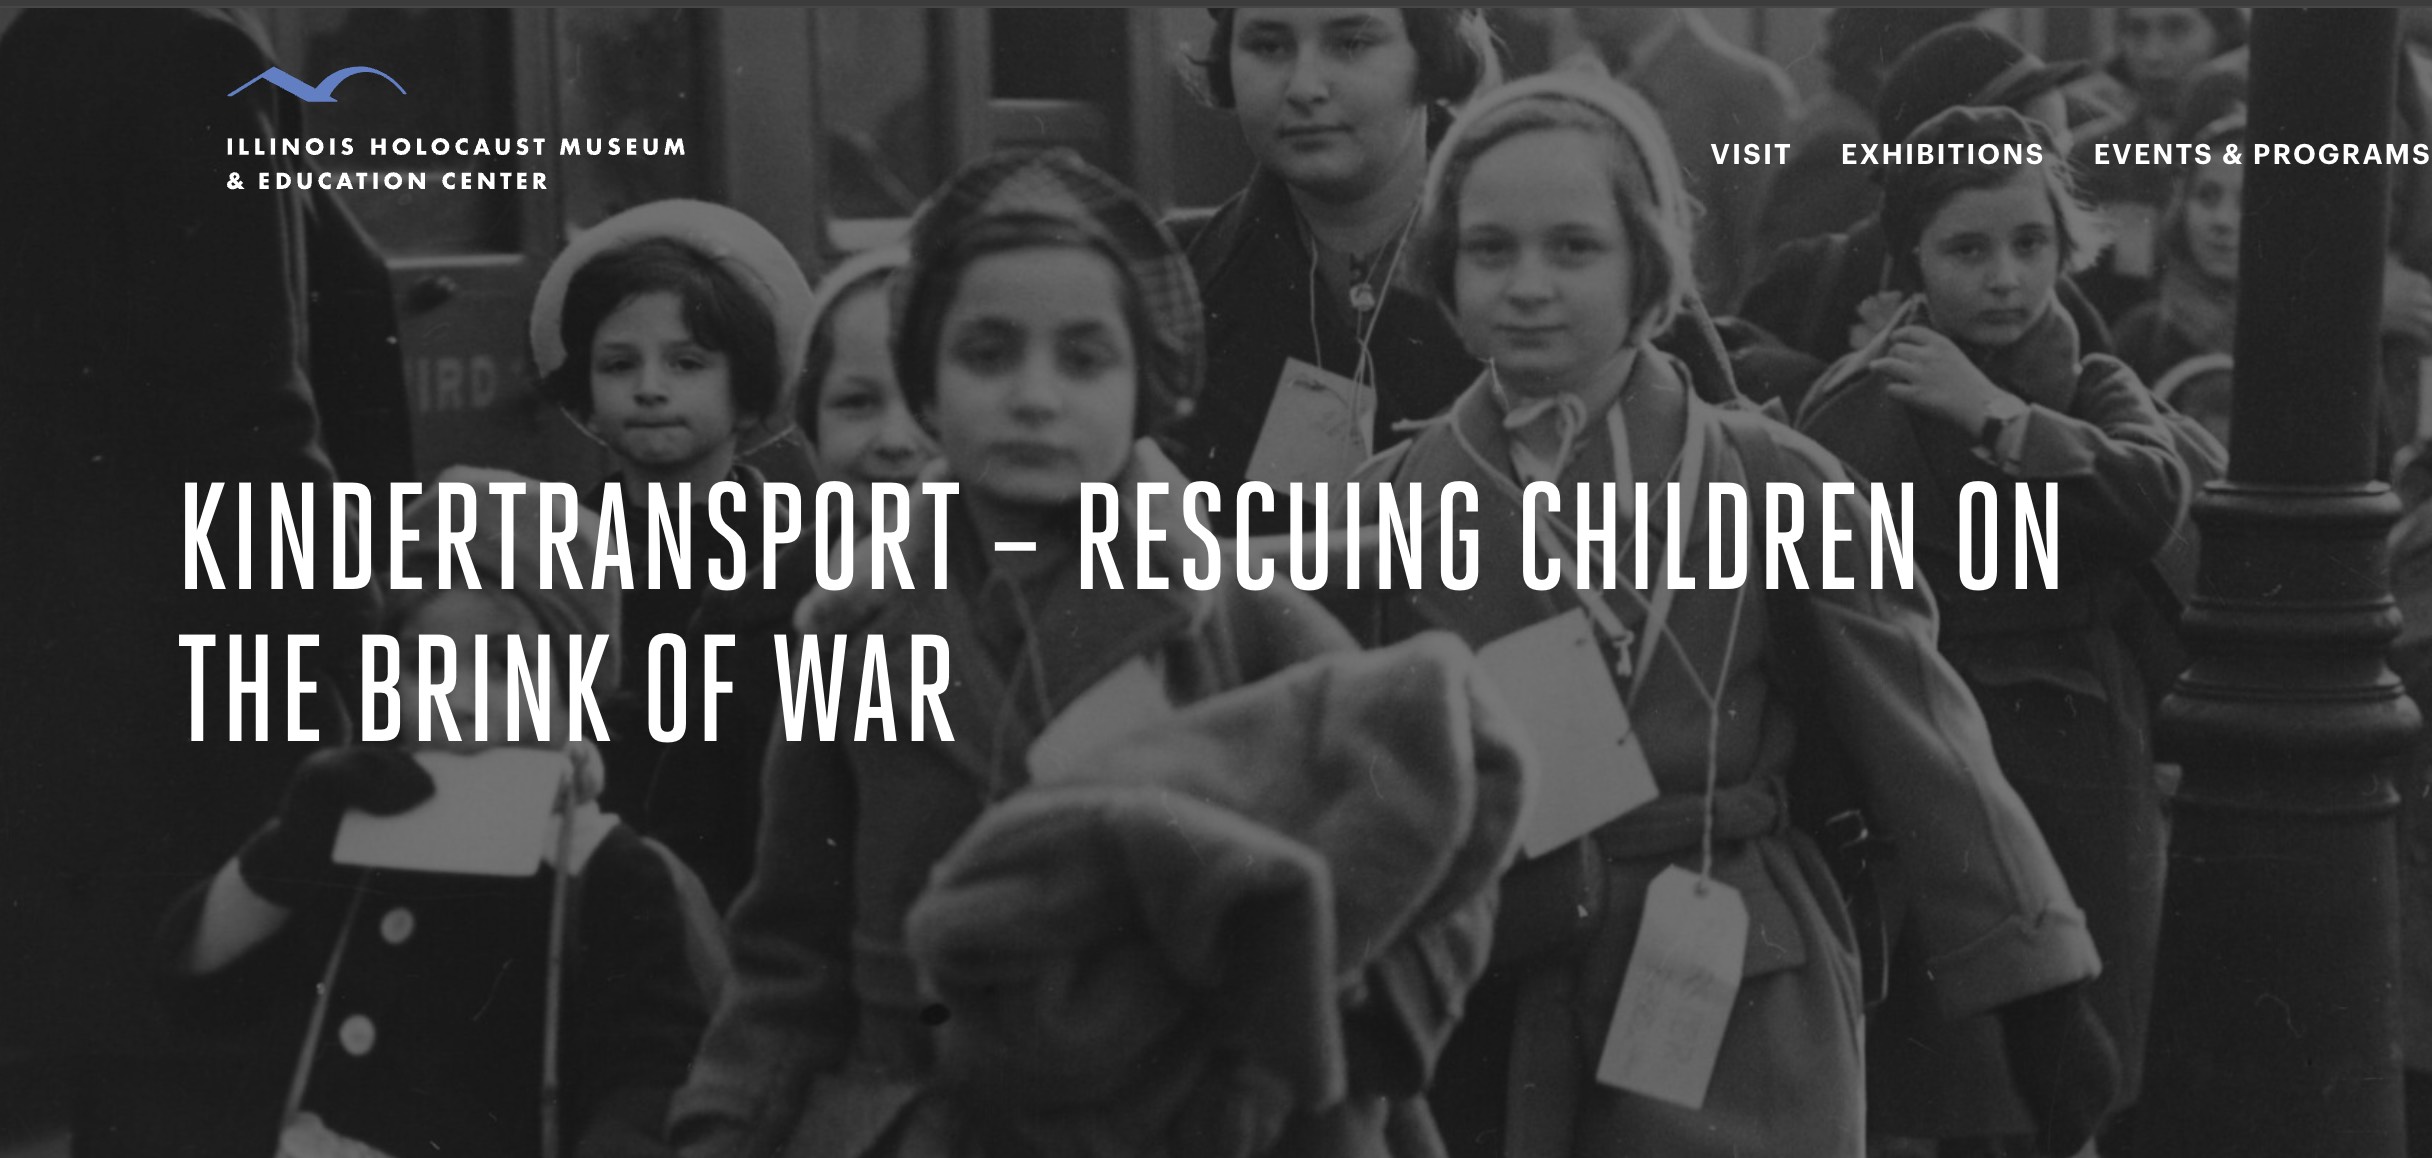 Kindertransport – Rescuing Children on the Brink of War Exhibit at the Illinois Holocaust Museum